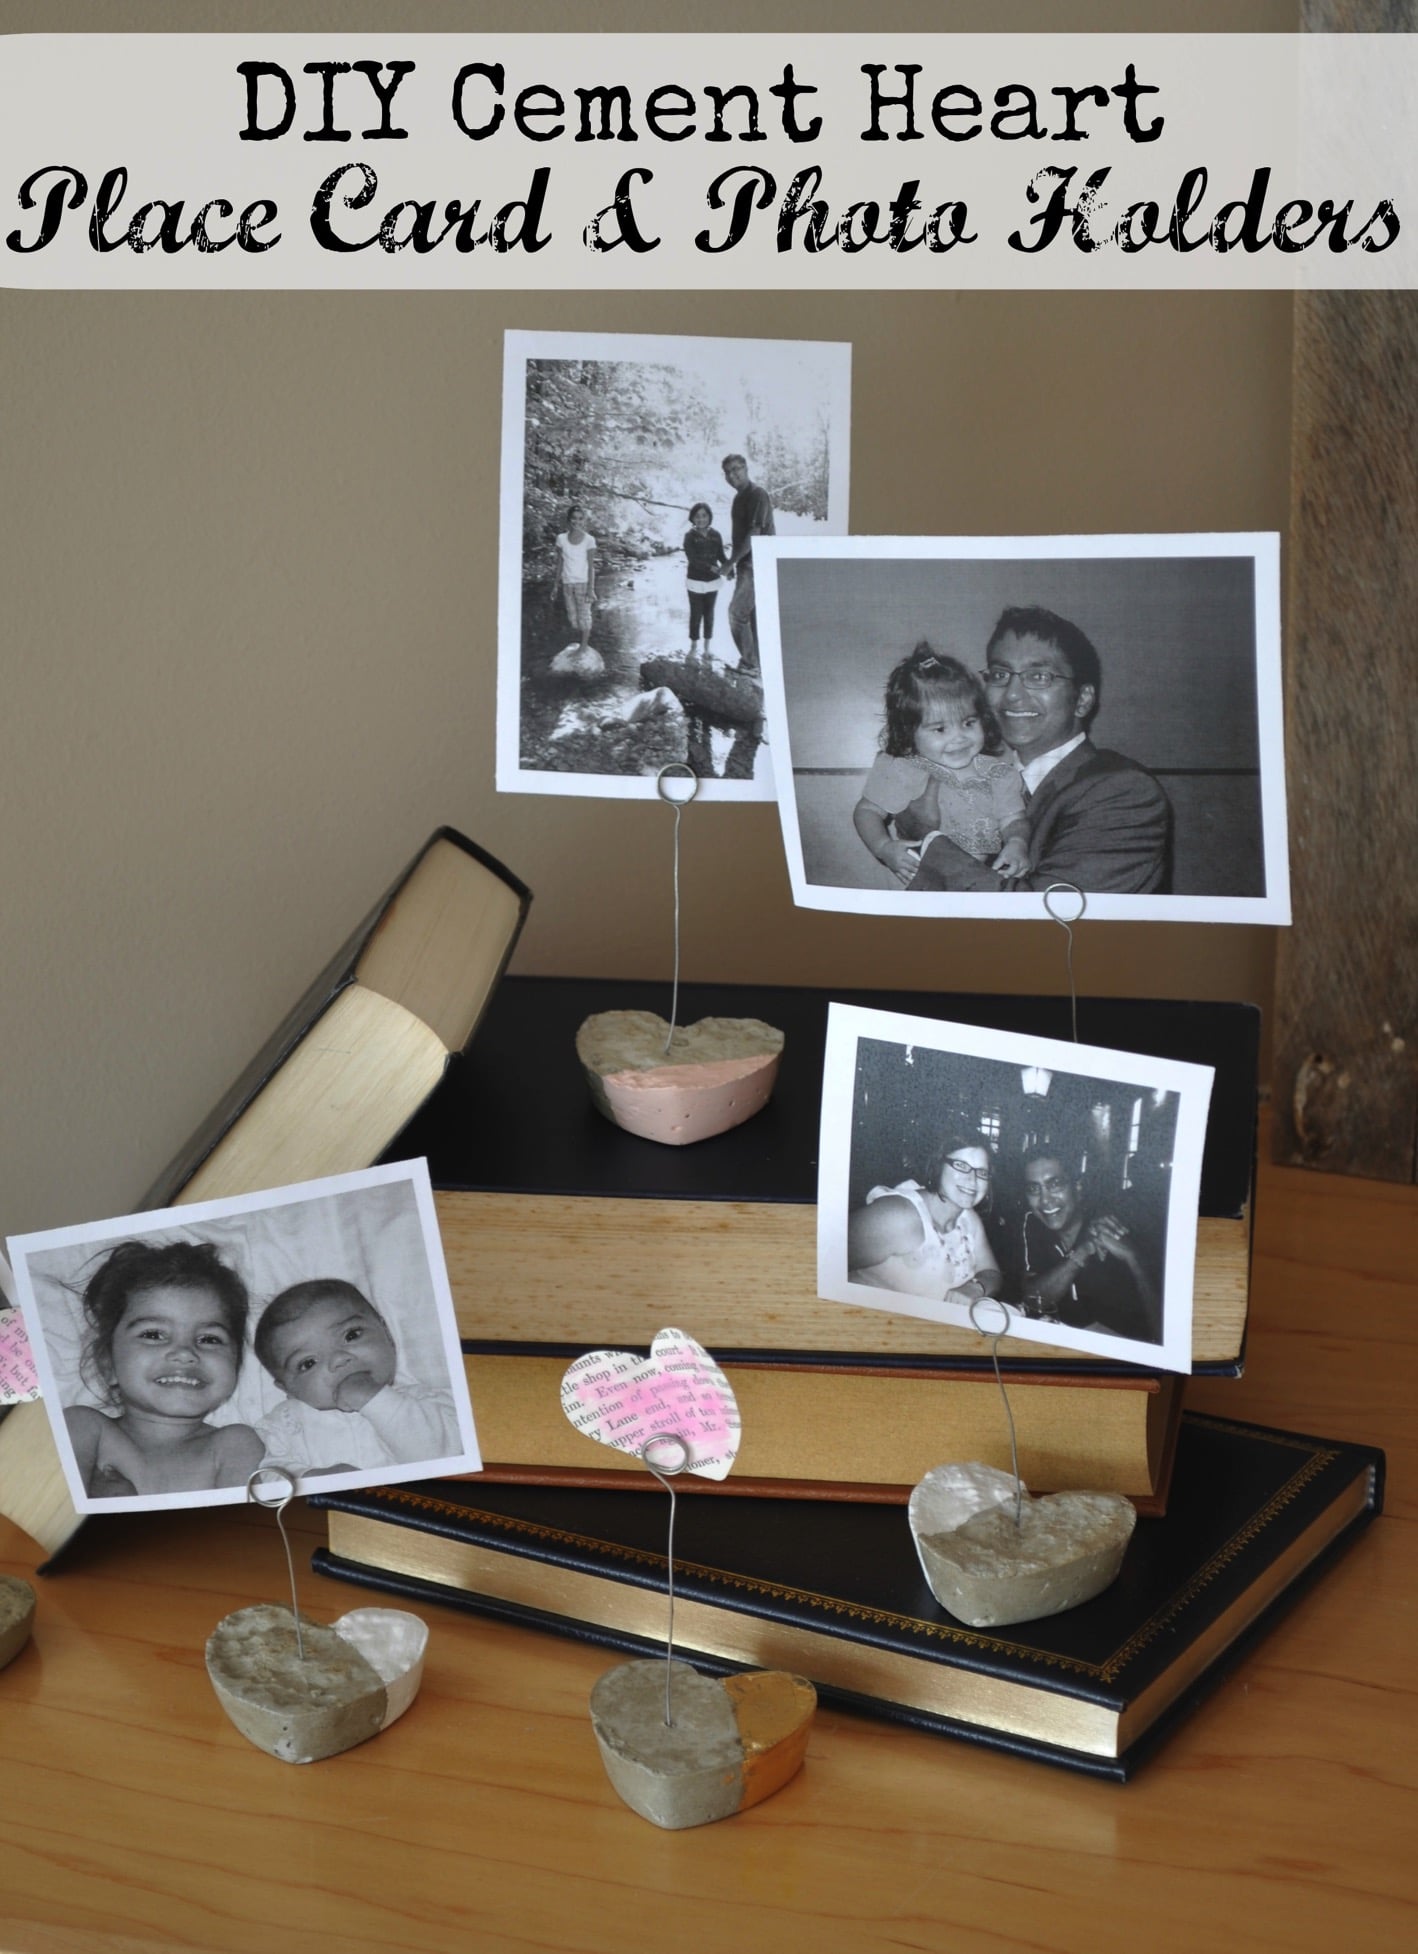 DIY Cement Heart Place Card and Photo Holders: Easy to make with a dollar store baking tray mould and some quick dry cement. Great for Valentine's Day, a wedding, or as home decor.